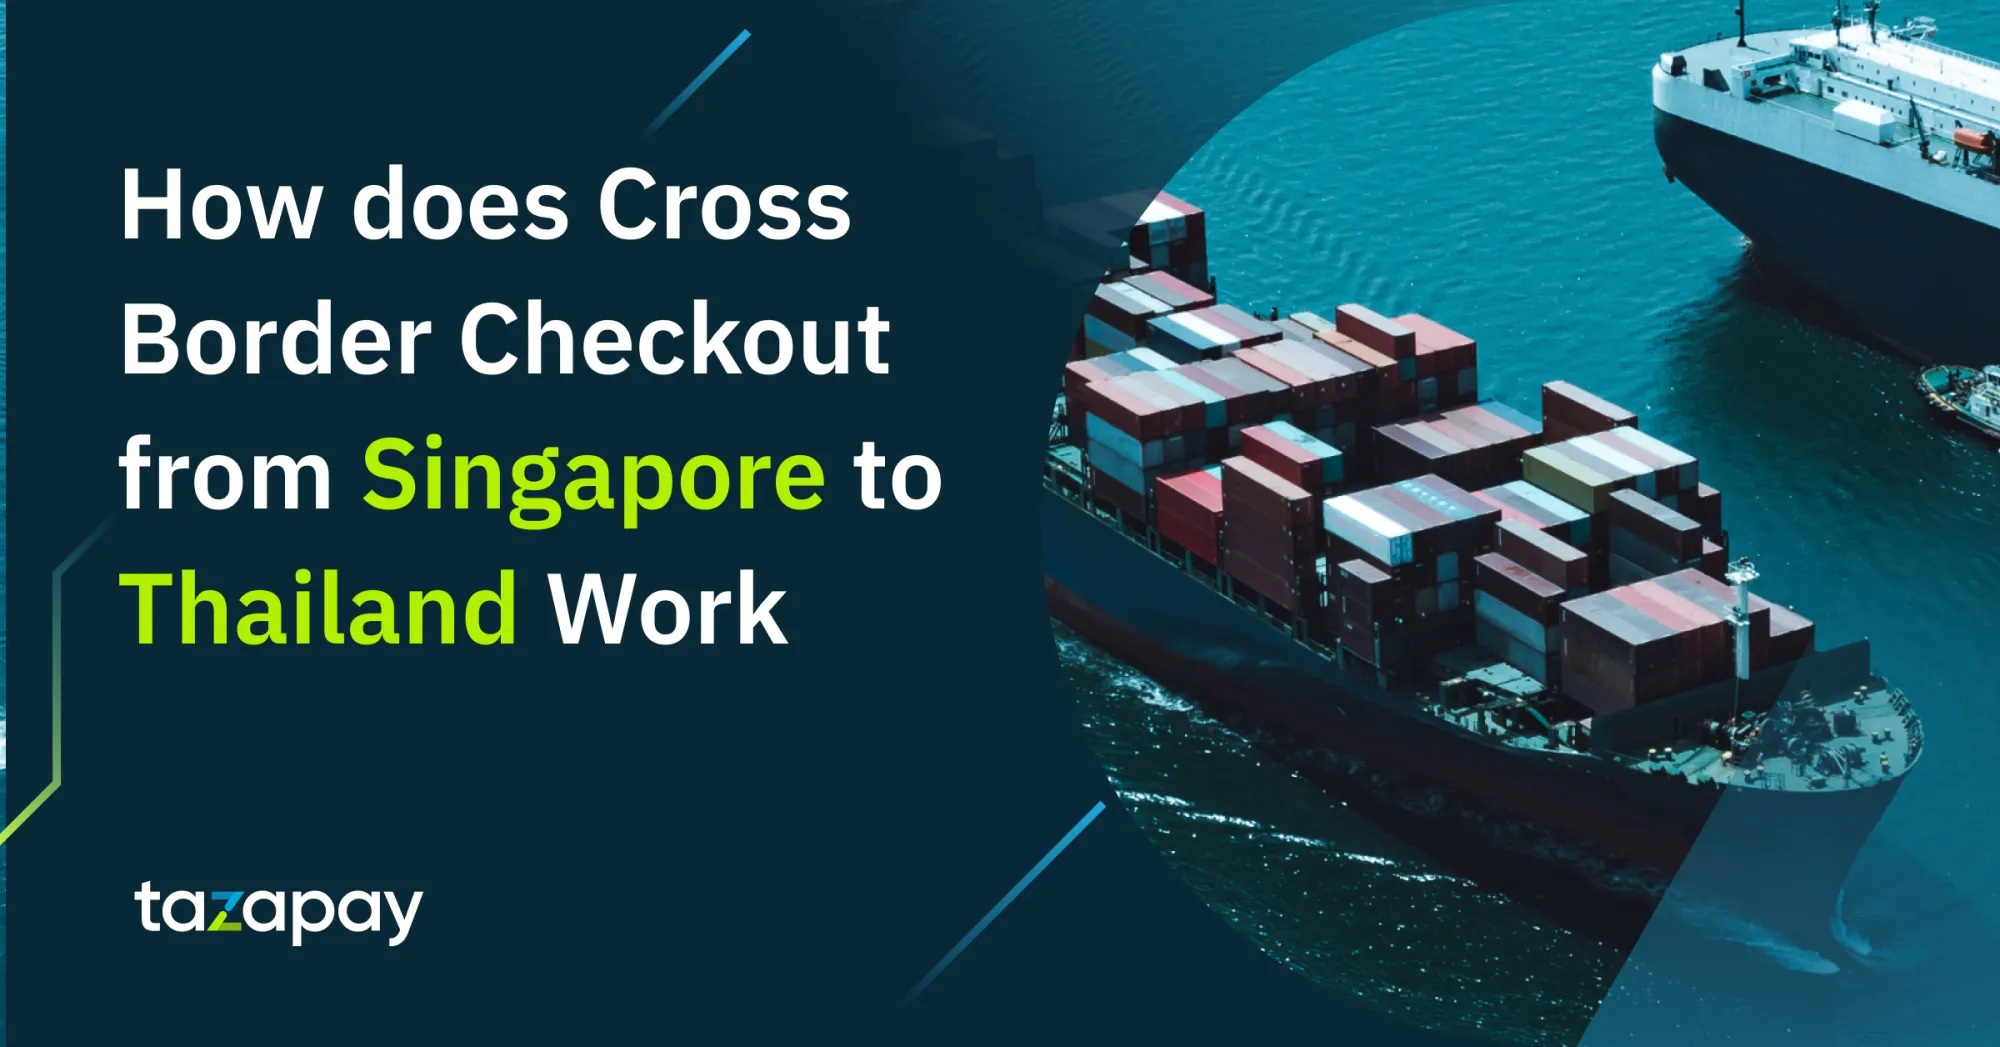 Payment Gateway Rails: How Does Cross Border Checkout from Singapore to Thailand Work?